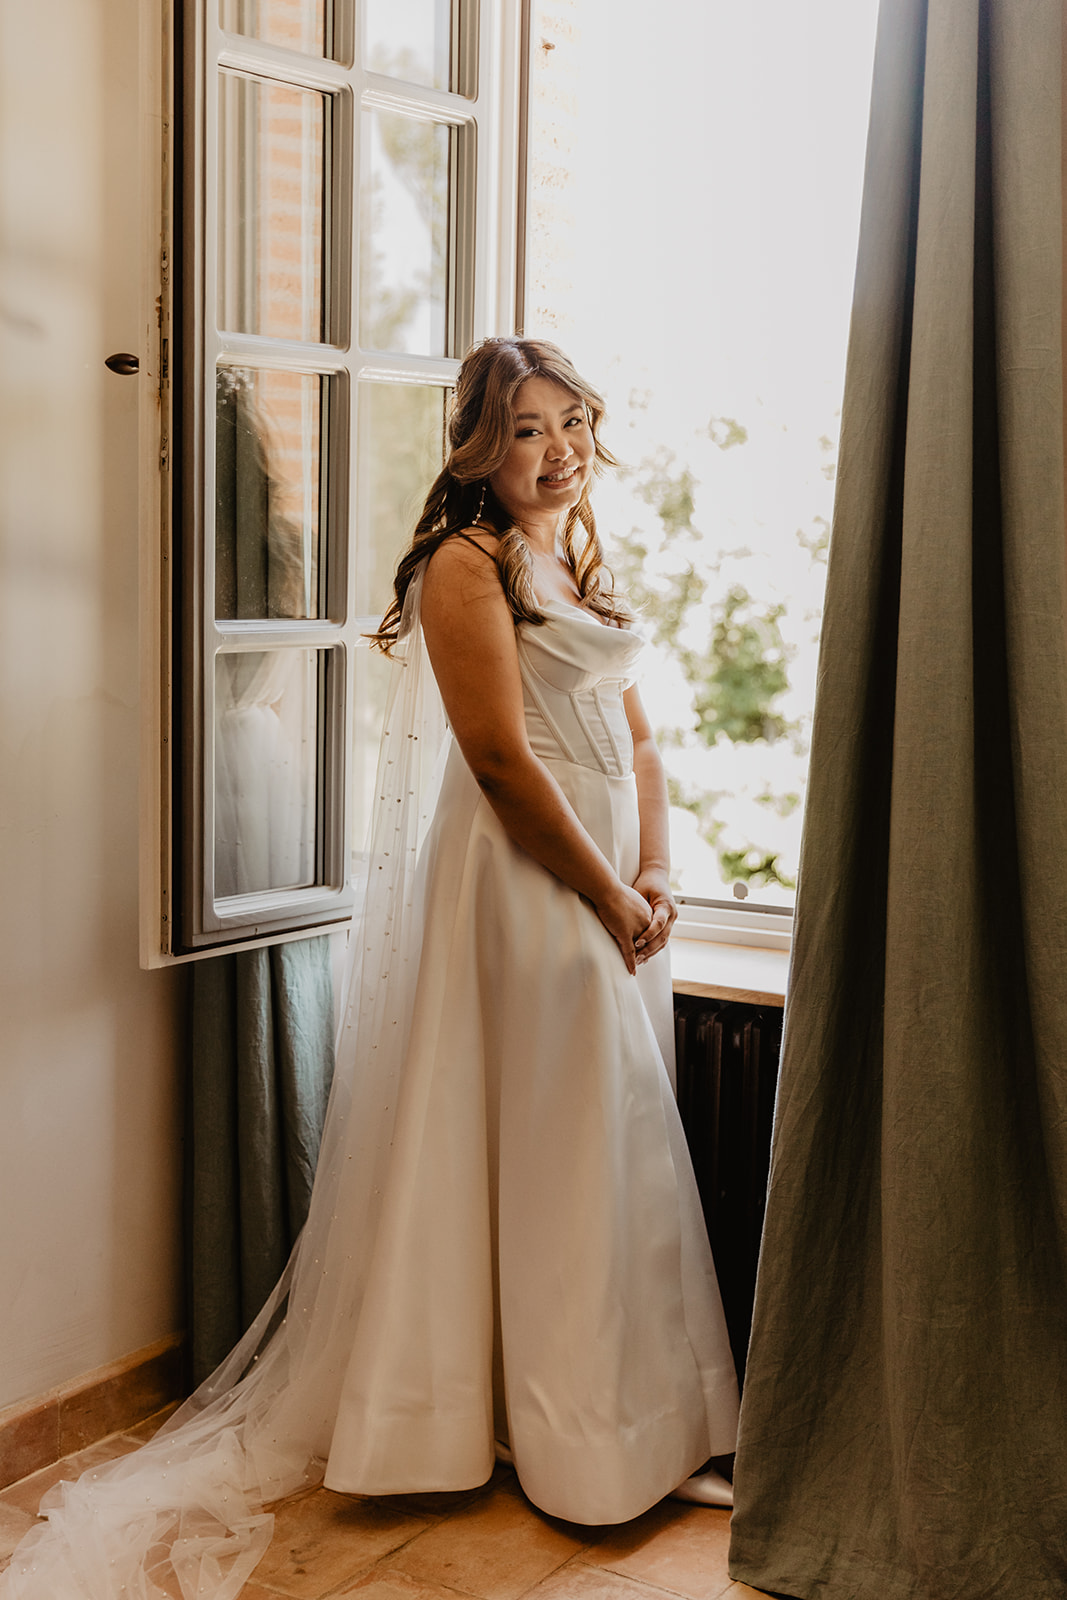 Bride by a window at a France Destination Wedding. Photography and Videography by Olive Joy Photography